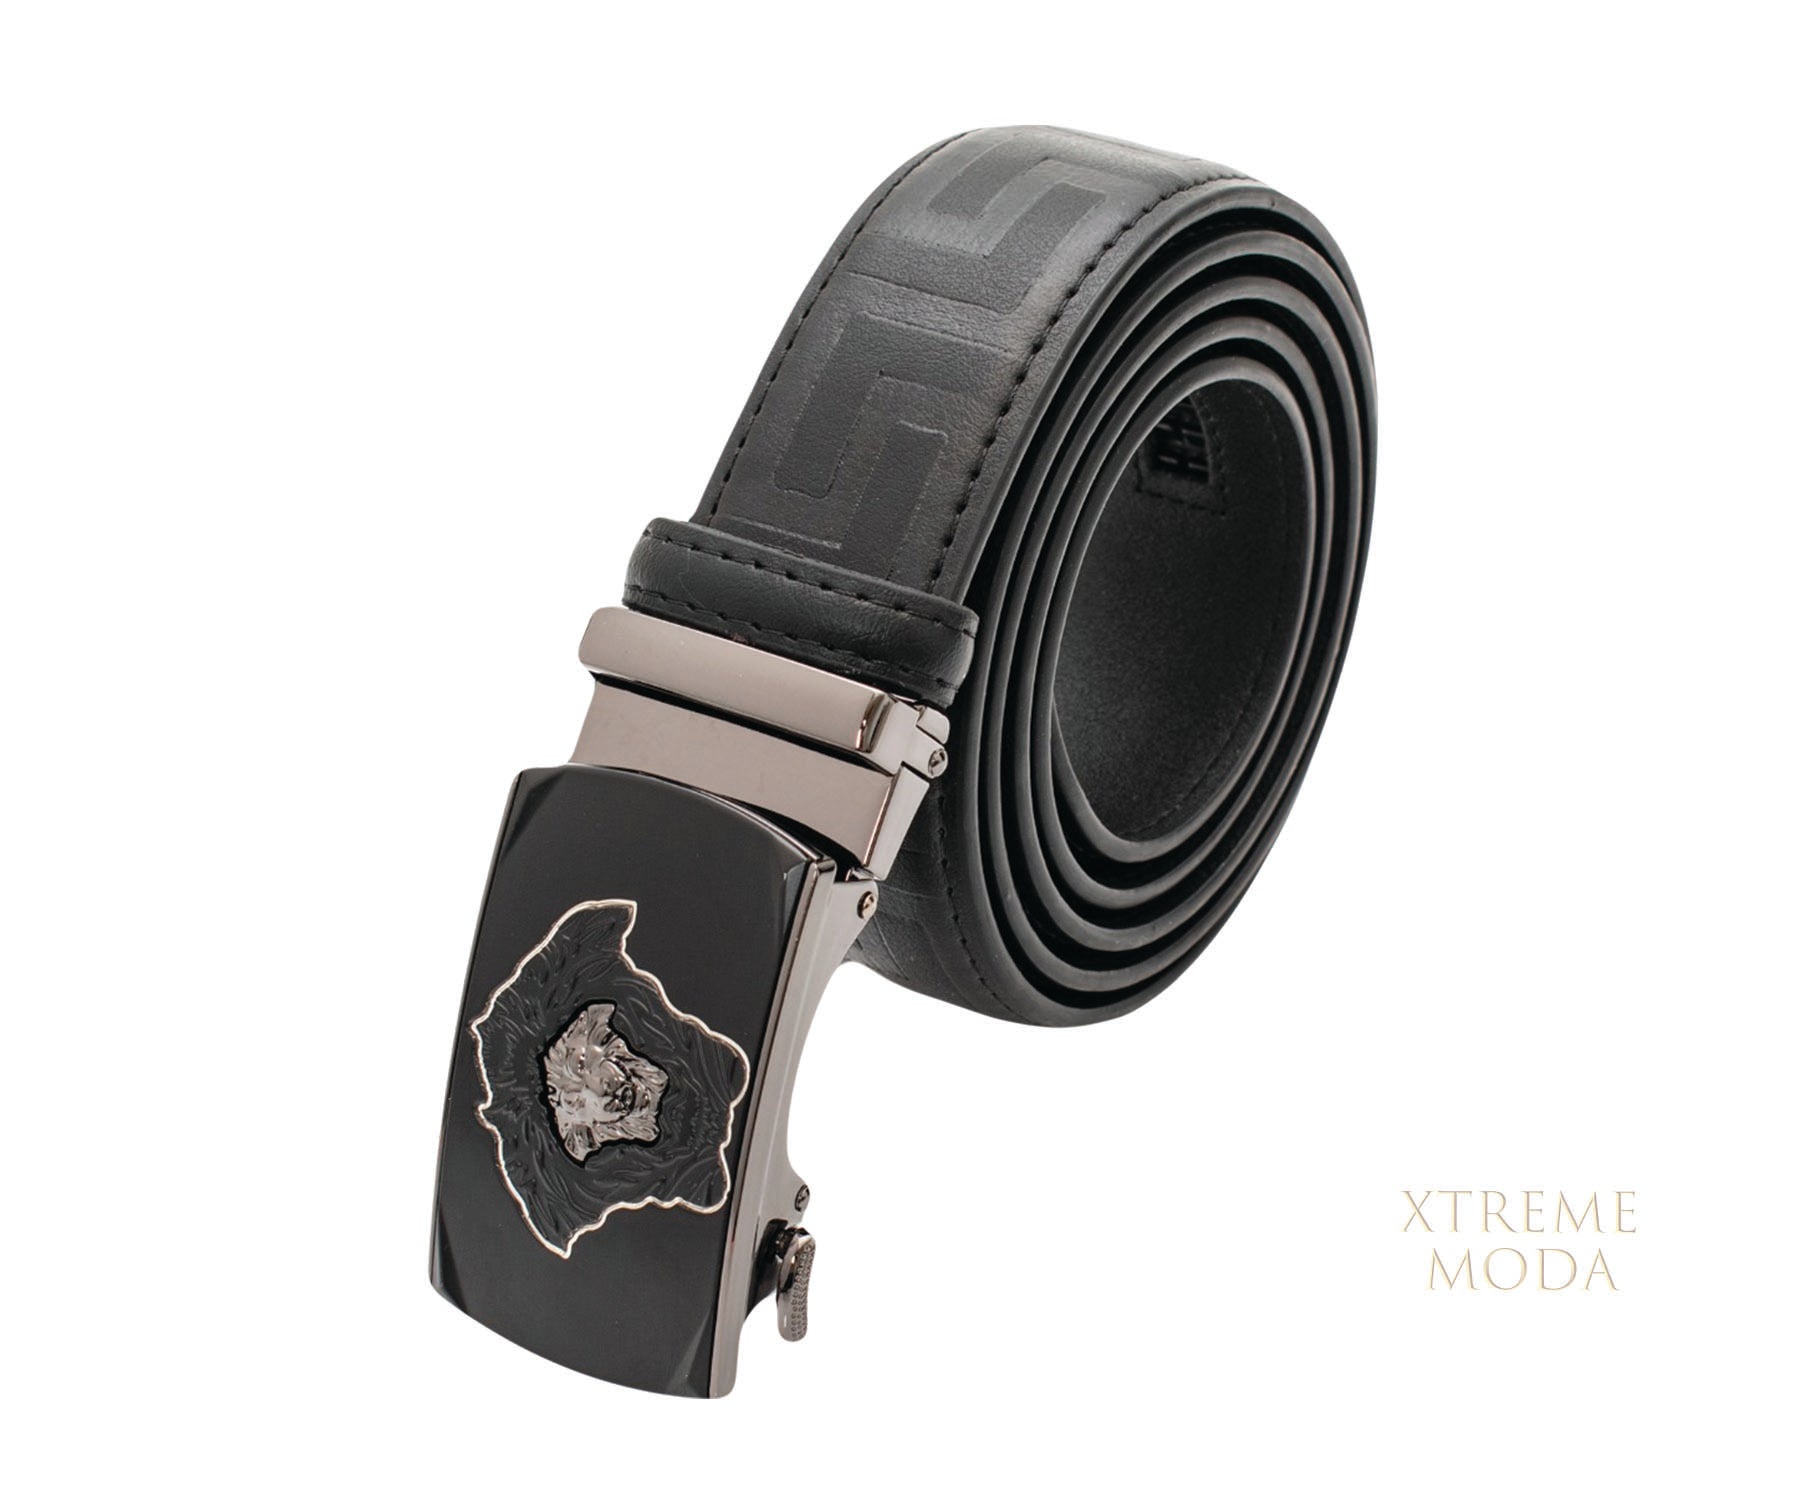 Men's Black Pu Leather Belt With Automatic Buckle, Korean Style